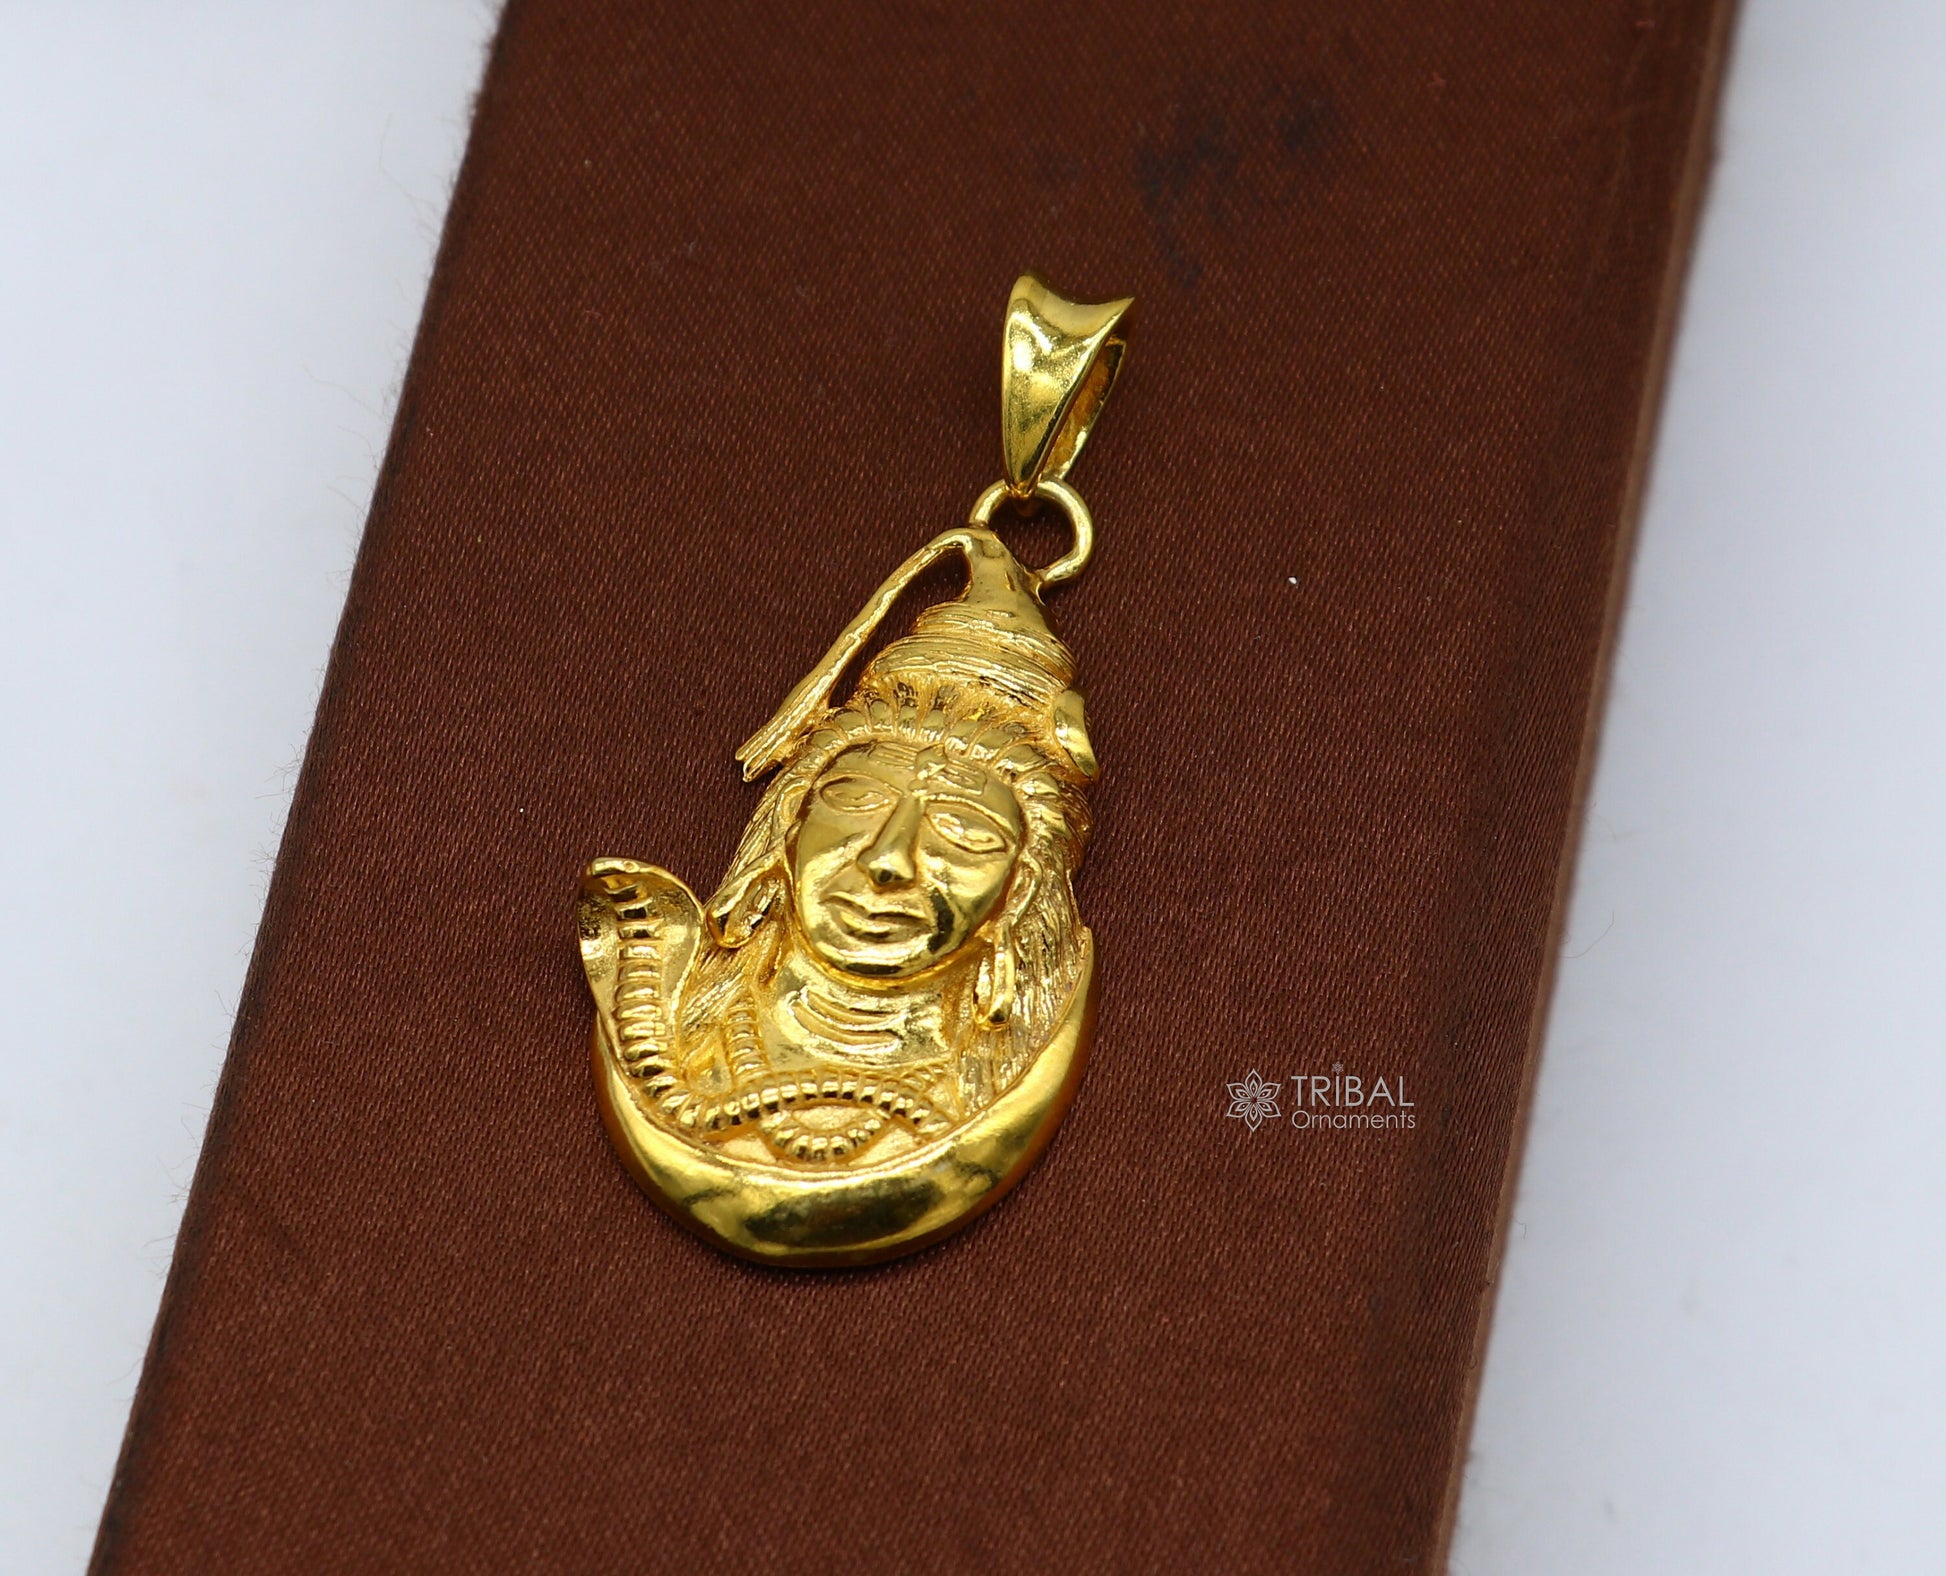 925 sterling silver amazing gold polished idol Lord Shiva pendant, excellent gifting unisex locket pendant customized jewelry nsp617 - TRIBAL ORNAMENTS